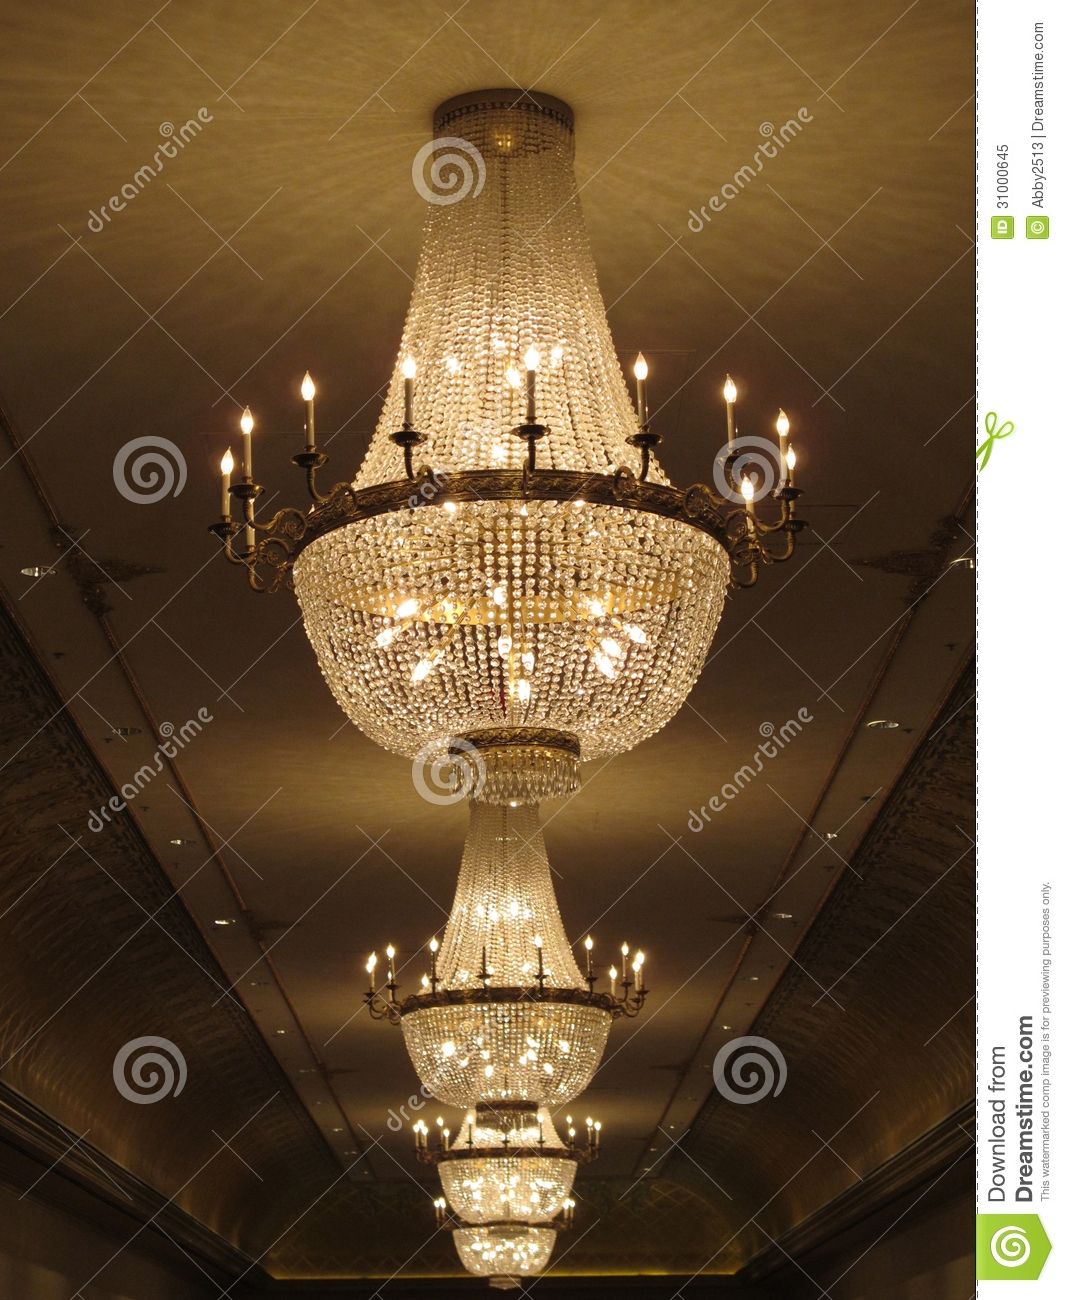 Gorgeous Crystal Chandelier Royalty Free Stock Photo Image 31000645 Regarding Ballroom Chandeliers (Photo 7 of 15)